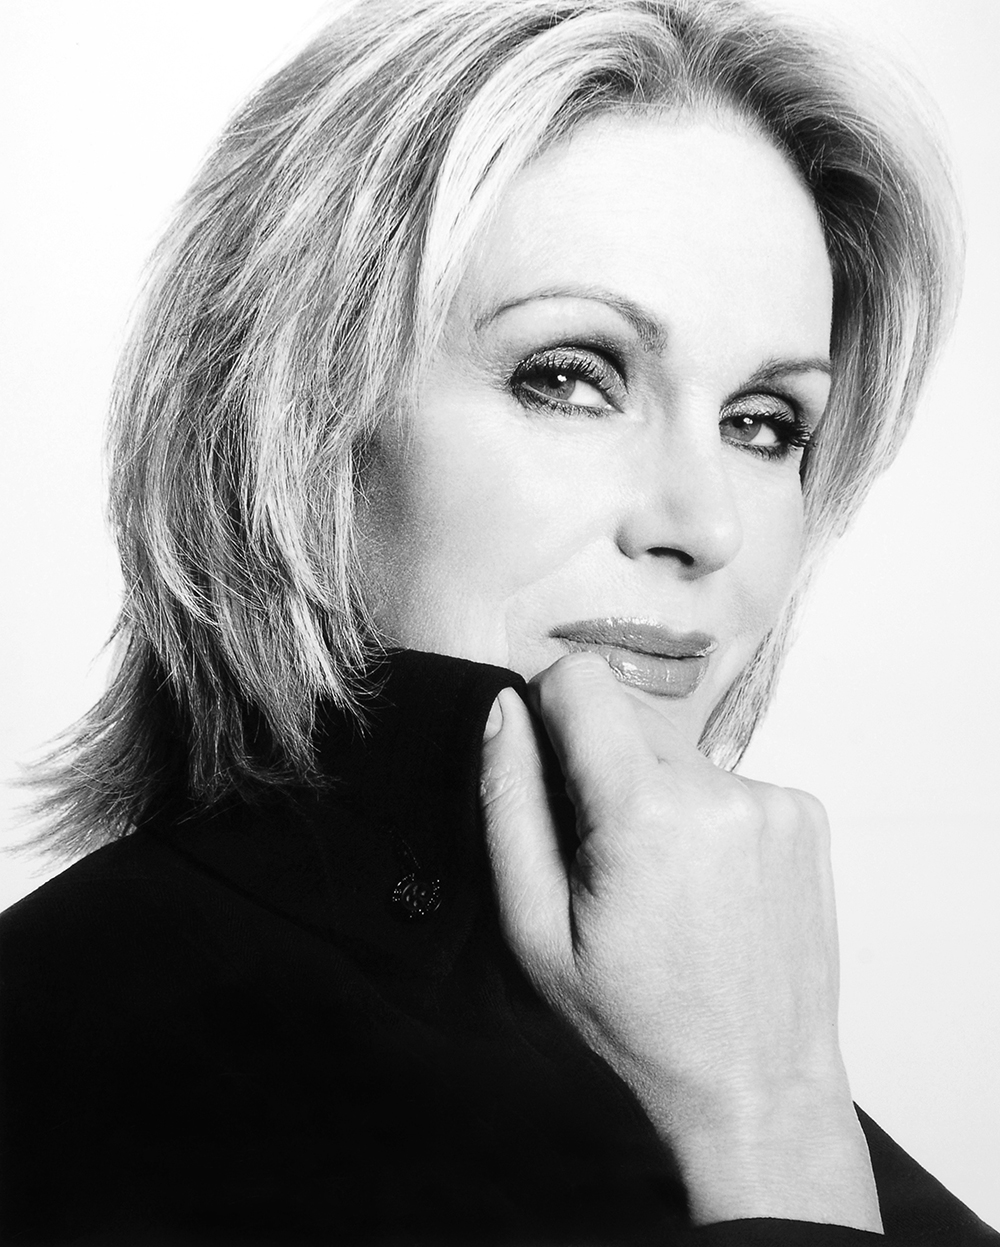 AbFab Joanna Lumley spills the beans on her favourite breakfast recipe